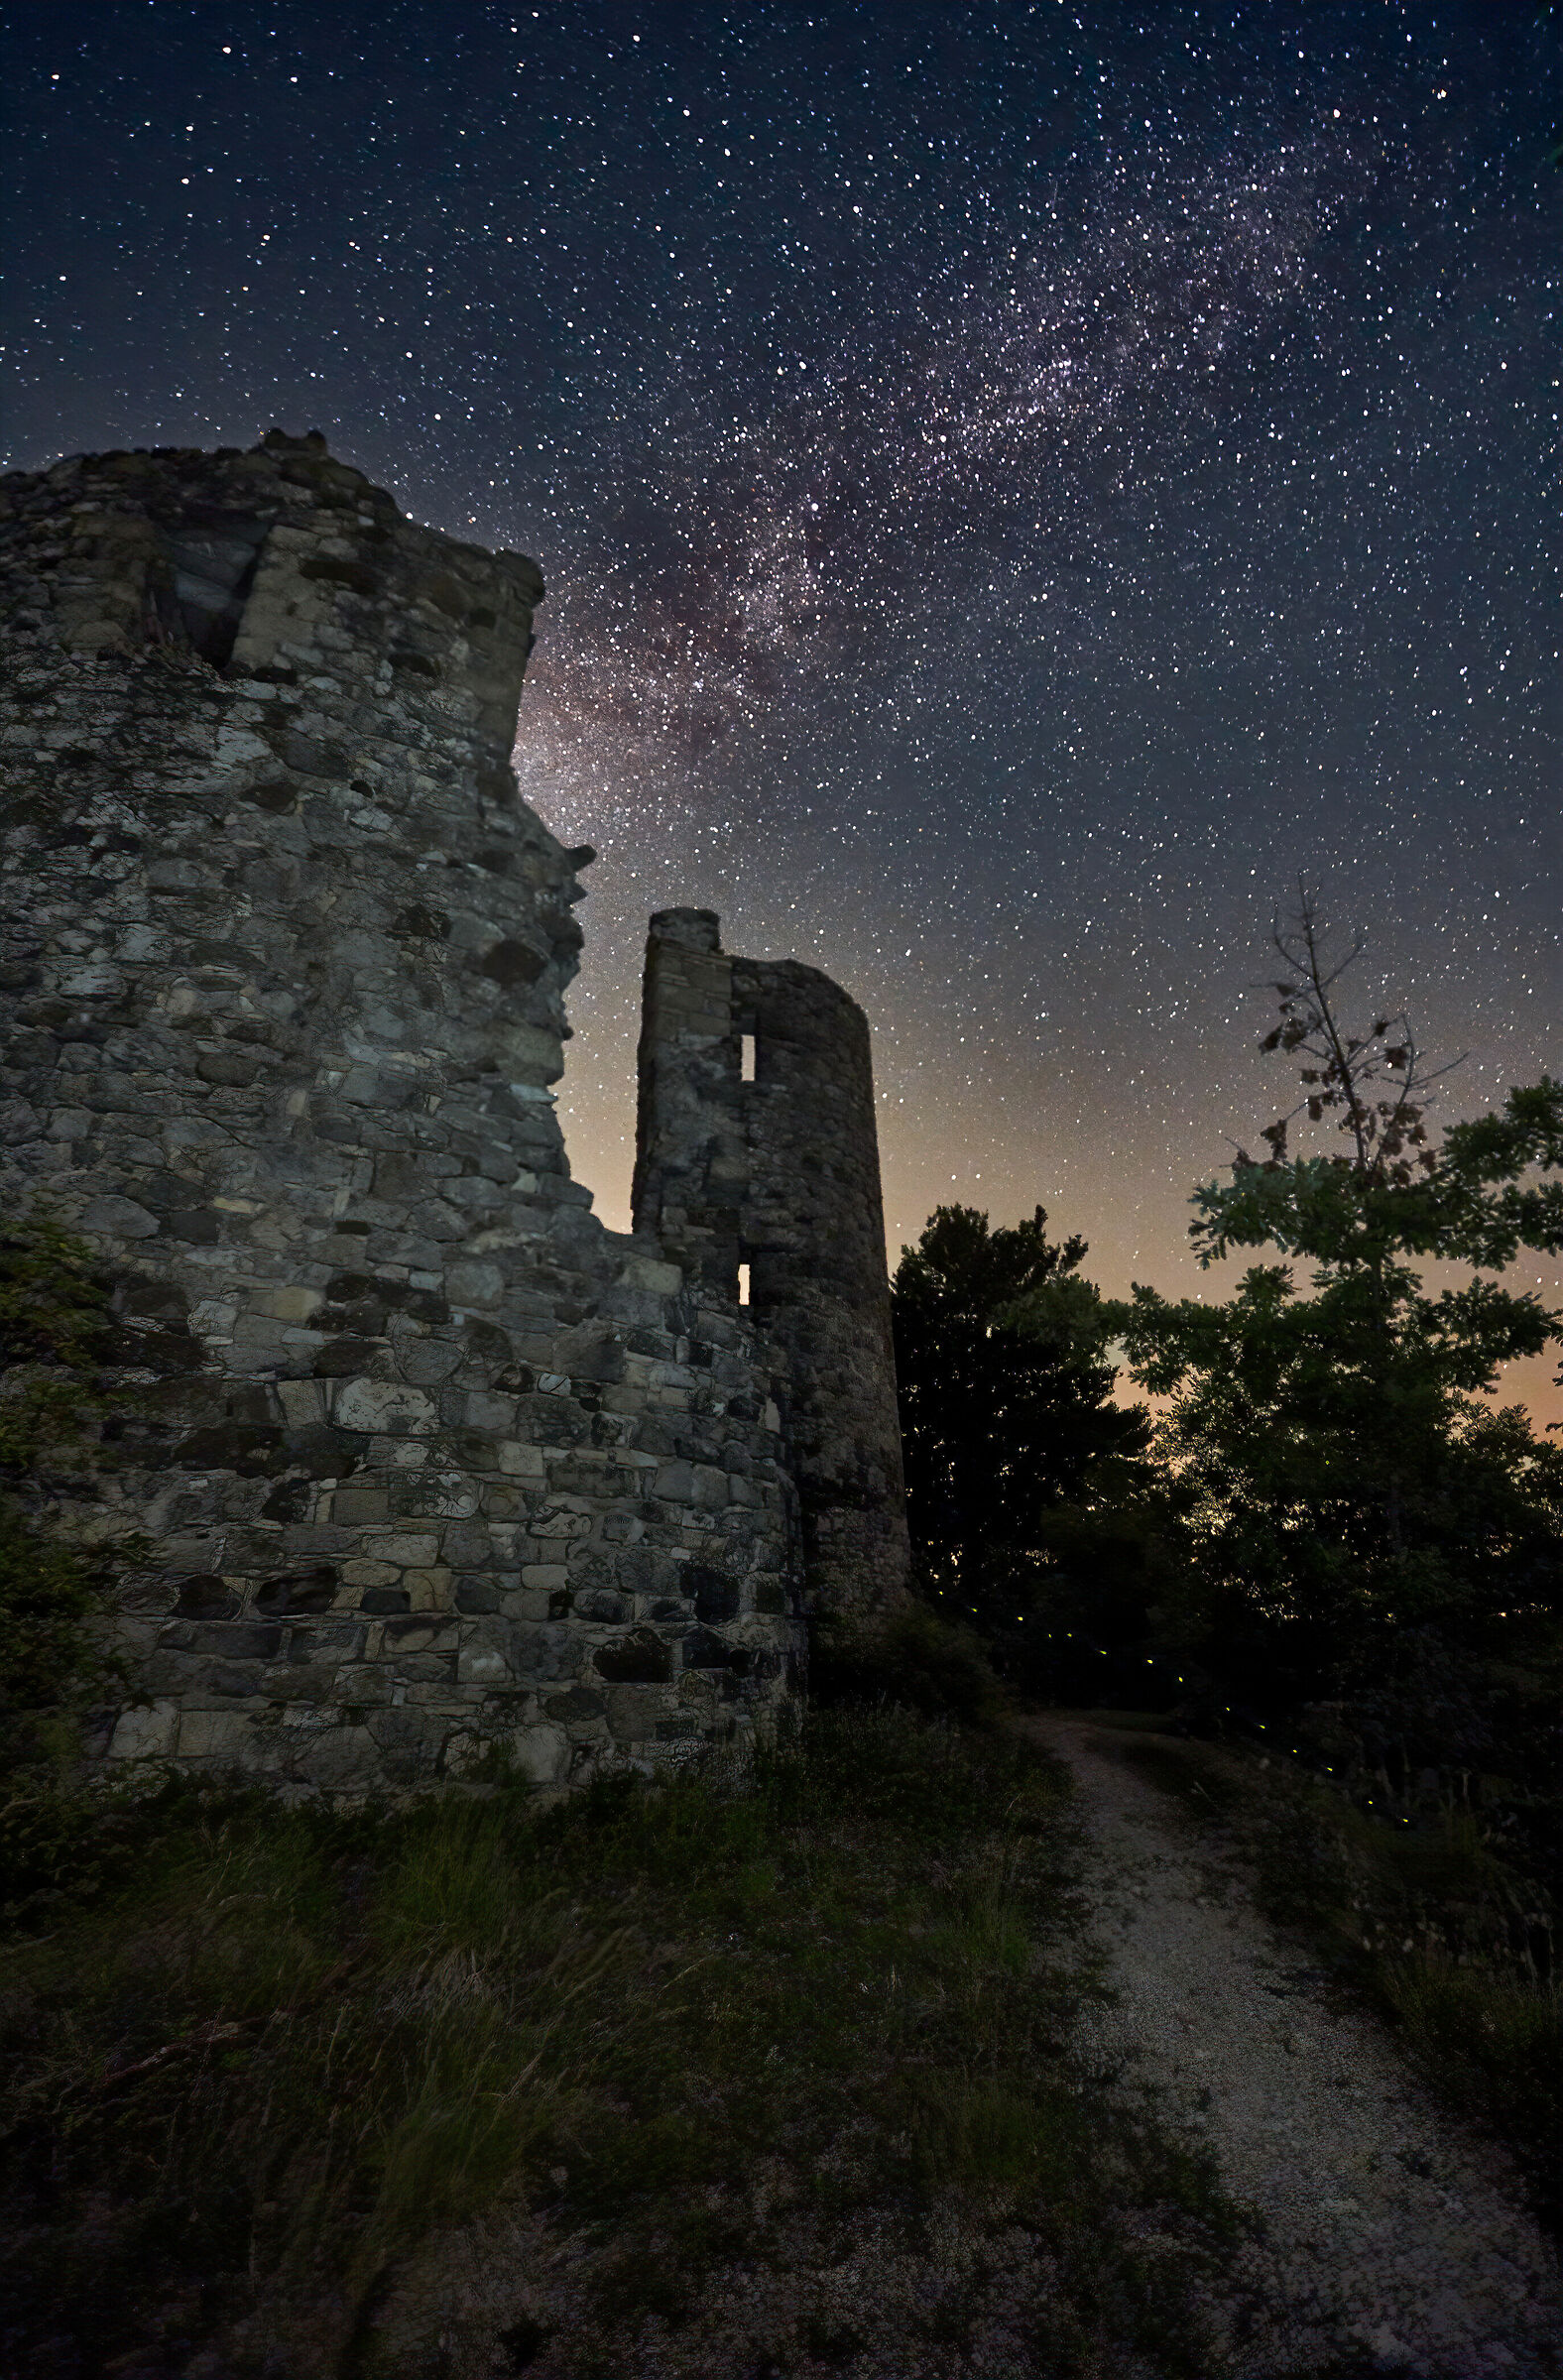 fort, milky way and passing firefly...